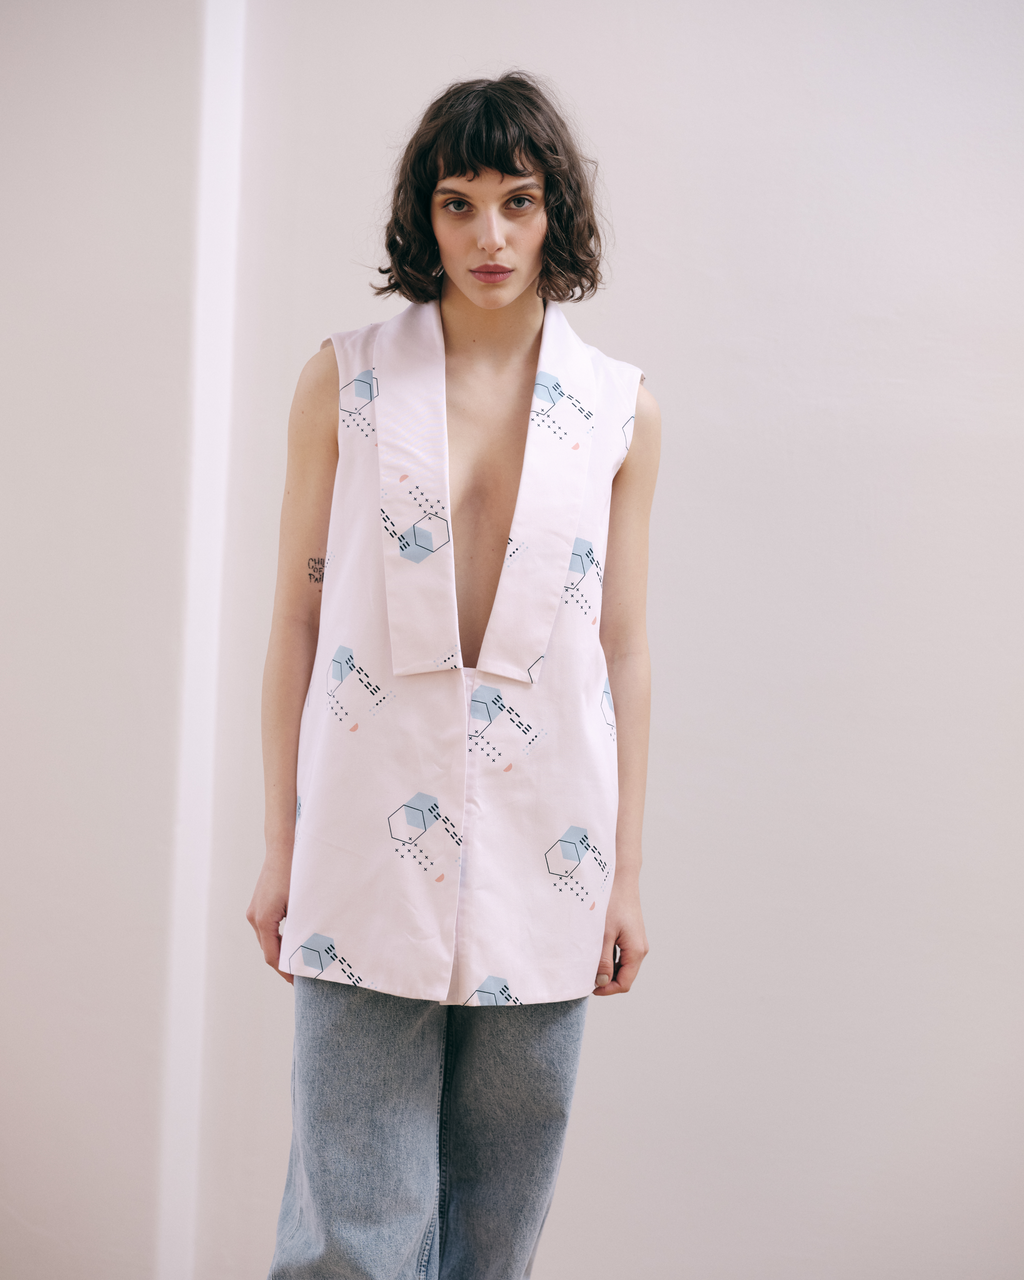 STRUCTURED, verb, construct or arrange according to a plan. Straight-cut oversize vest, with a geometric shawl collar. Unique patterns designed by the ROAD. The vest has an open back and ties that can be adjusted. Made in 100% cotton